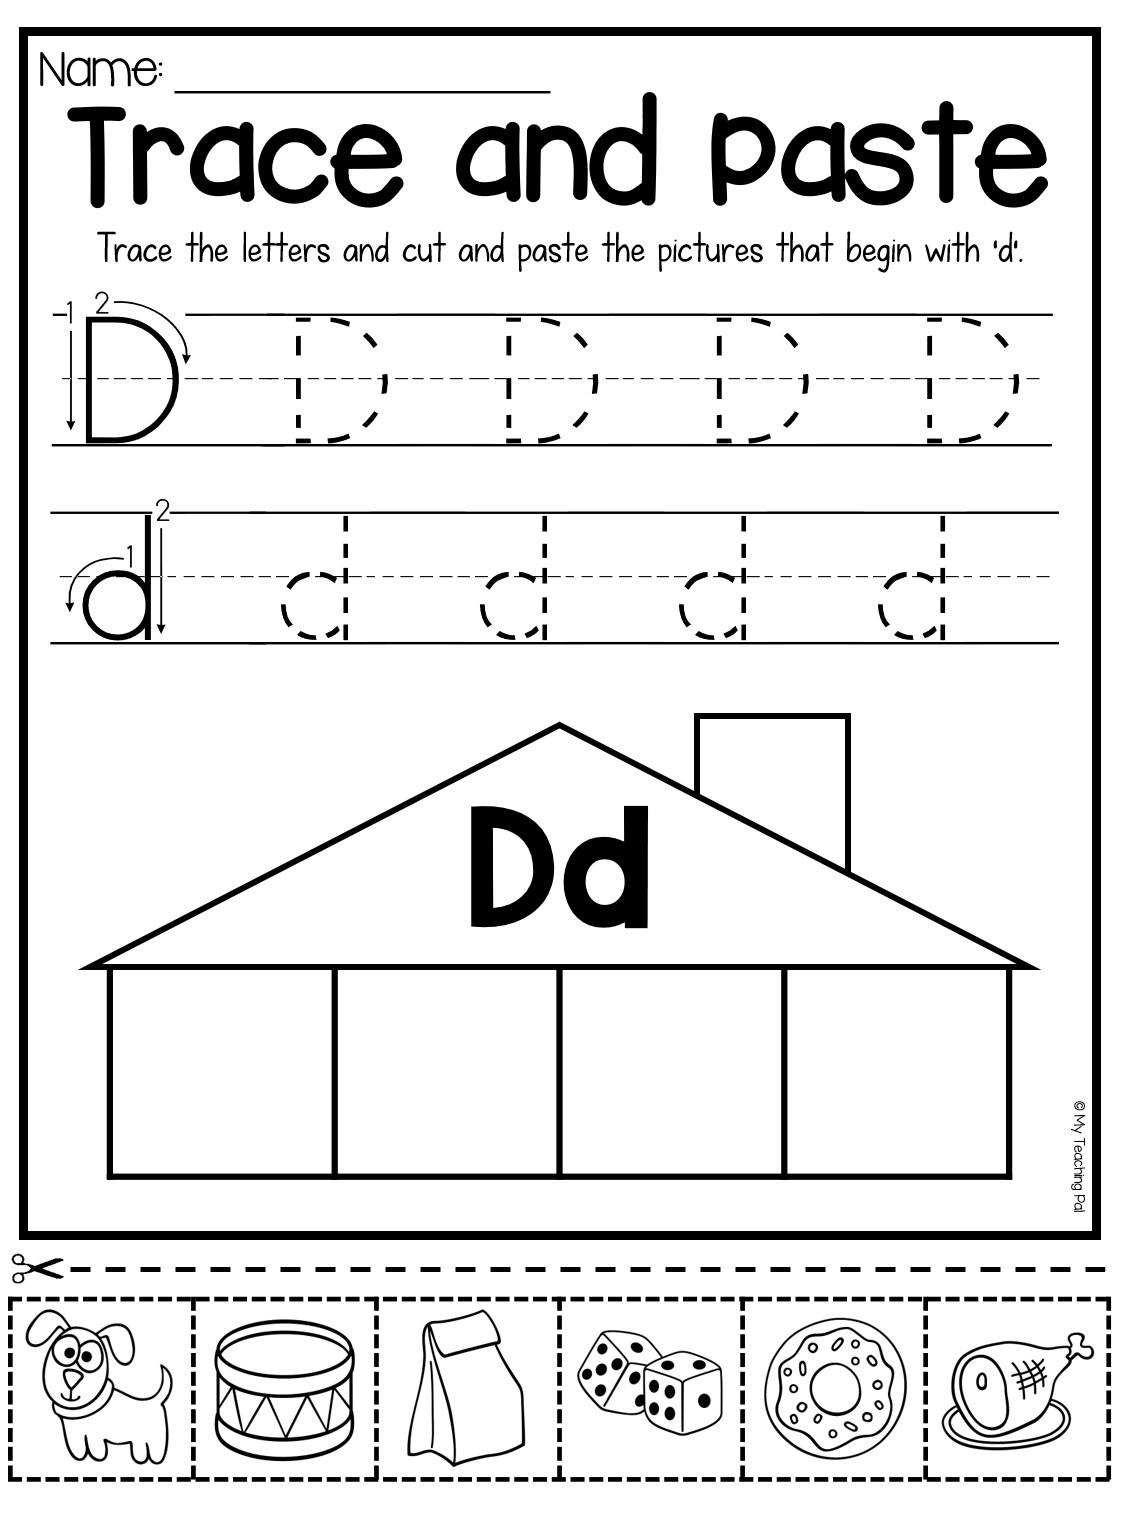 Kids Worksheets Pre K Pin On Age Number | Chesterudell pertaining to Letter D Worksheets For Pre K